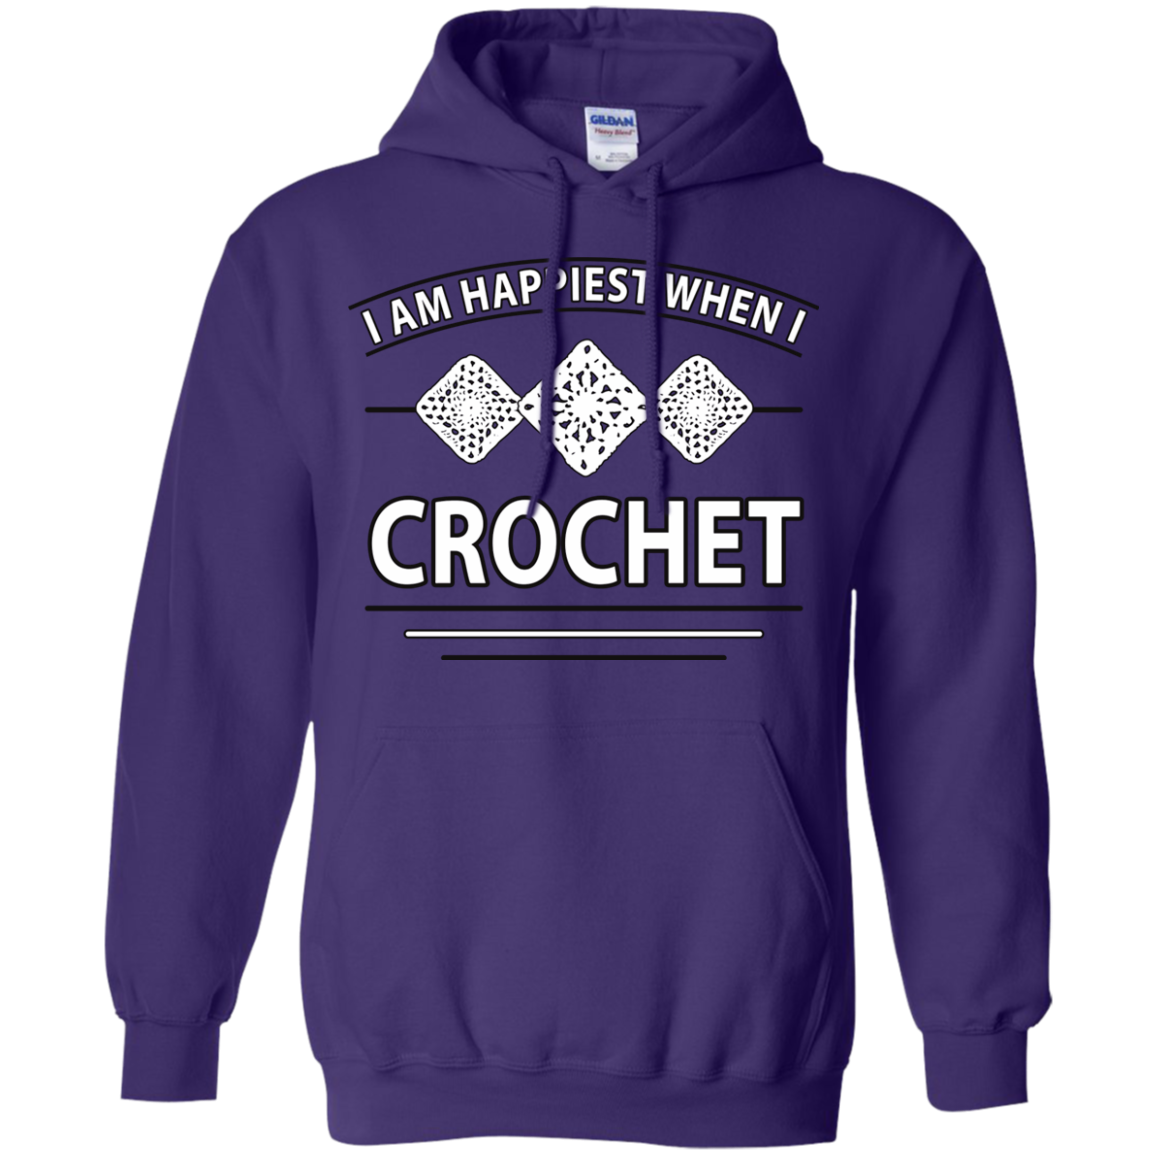 I Am Happiest When I Crochet Pullover Hoodies - Crafter4Life - 2